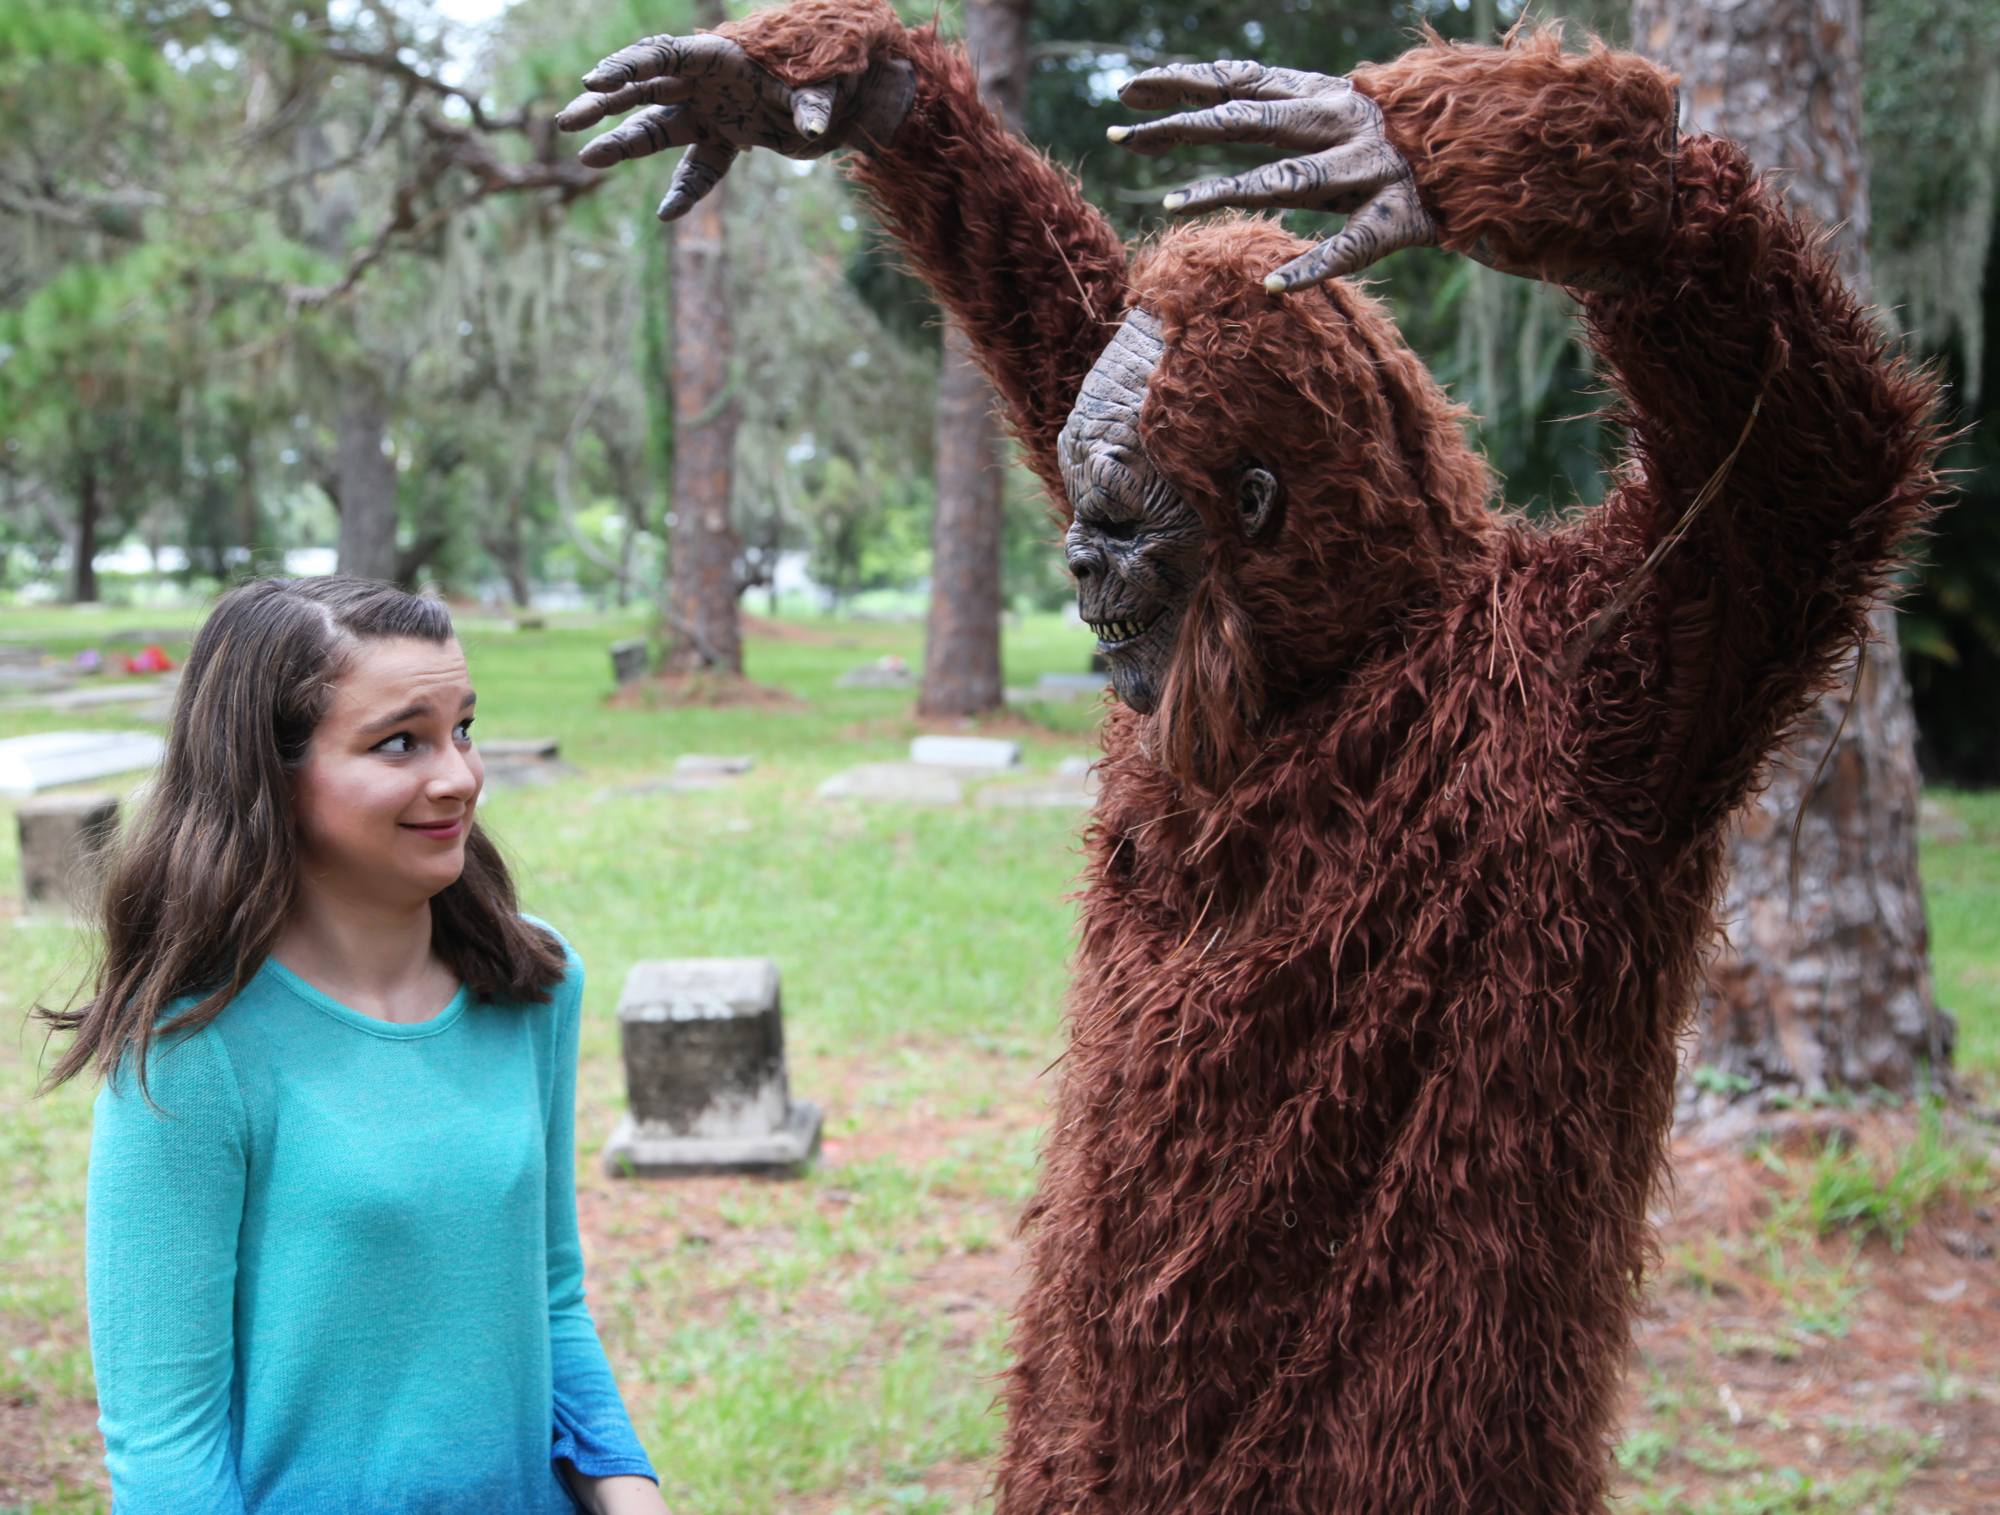 Actors Olivia Yagy and Brandon Follis rehearse for a scene in a cemetery. Photo by Austin McKinley